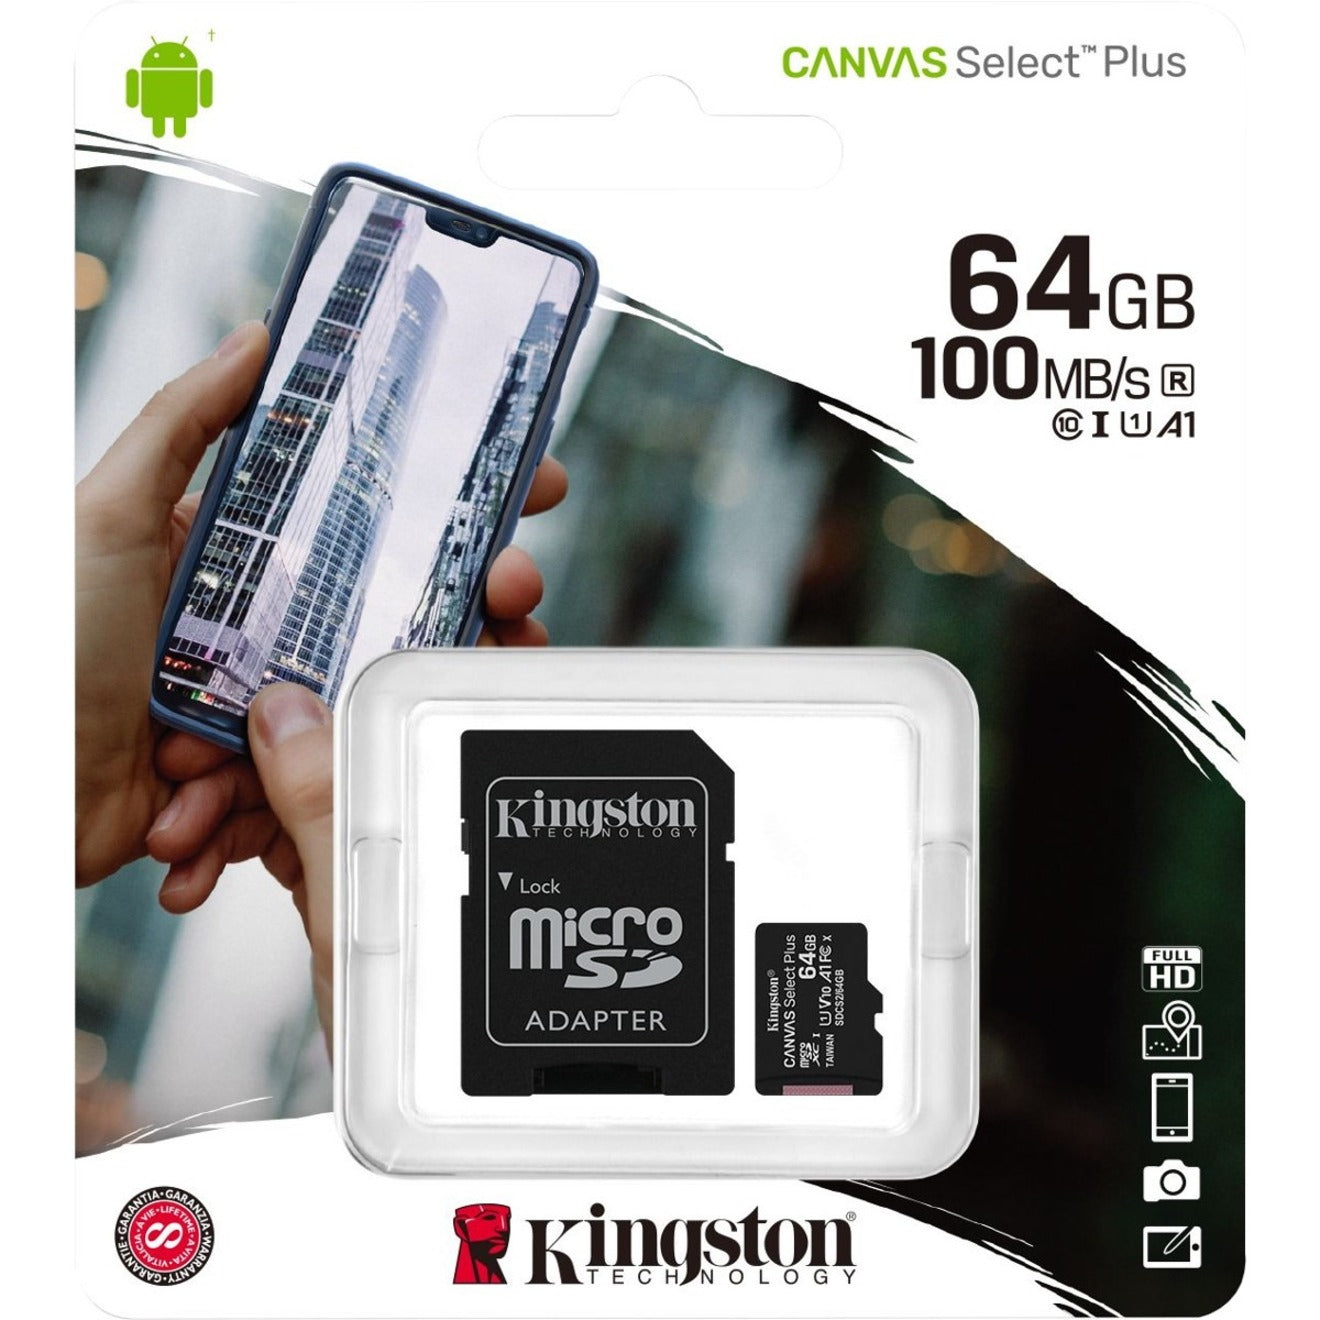 Kingston SDCS2/64GB Canvas Select Plus microSD Card With Android A1 Performance Class, 64GB Storage, 100MB/s Read Speed